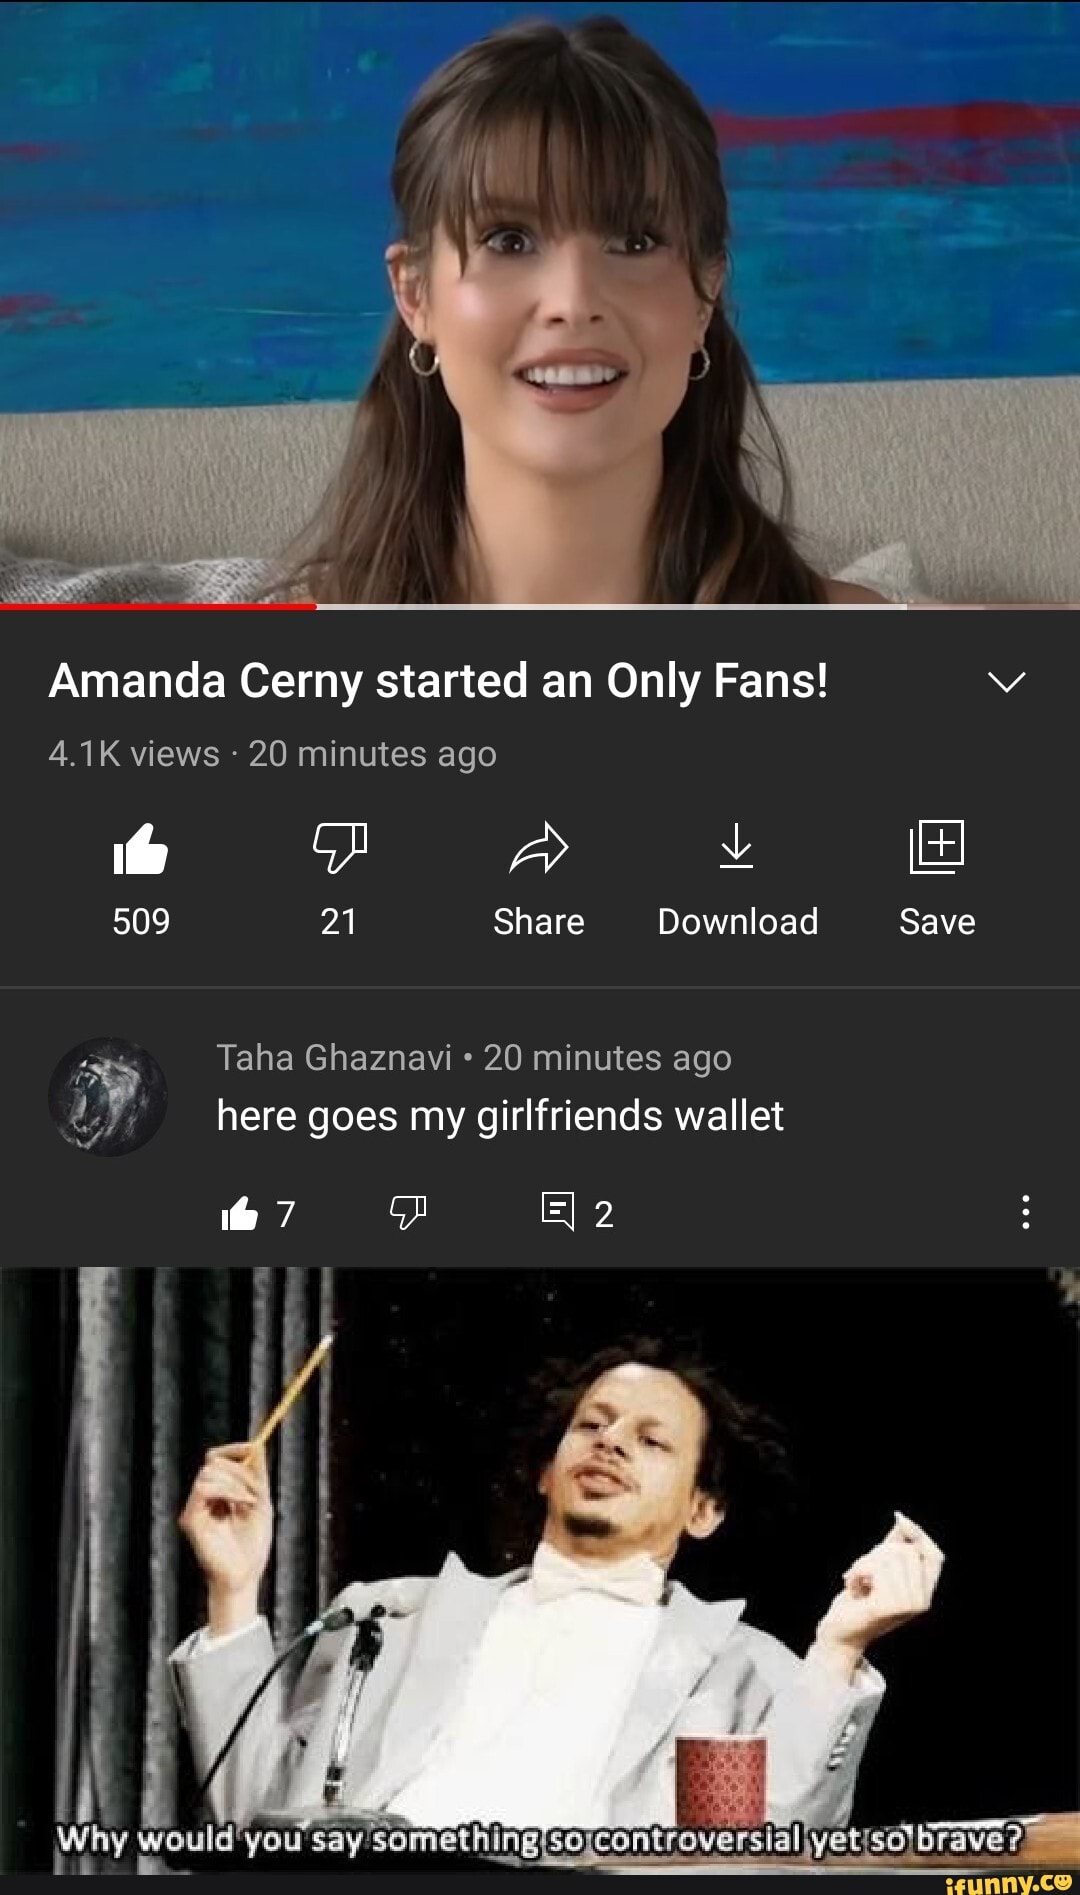 Amanda Cerny Only Fans Amanda Cerny started an Only Fans! 4.1K views - 20 minutes ago 509 21 Share  Download